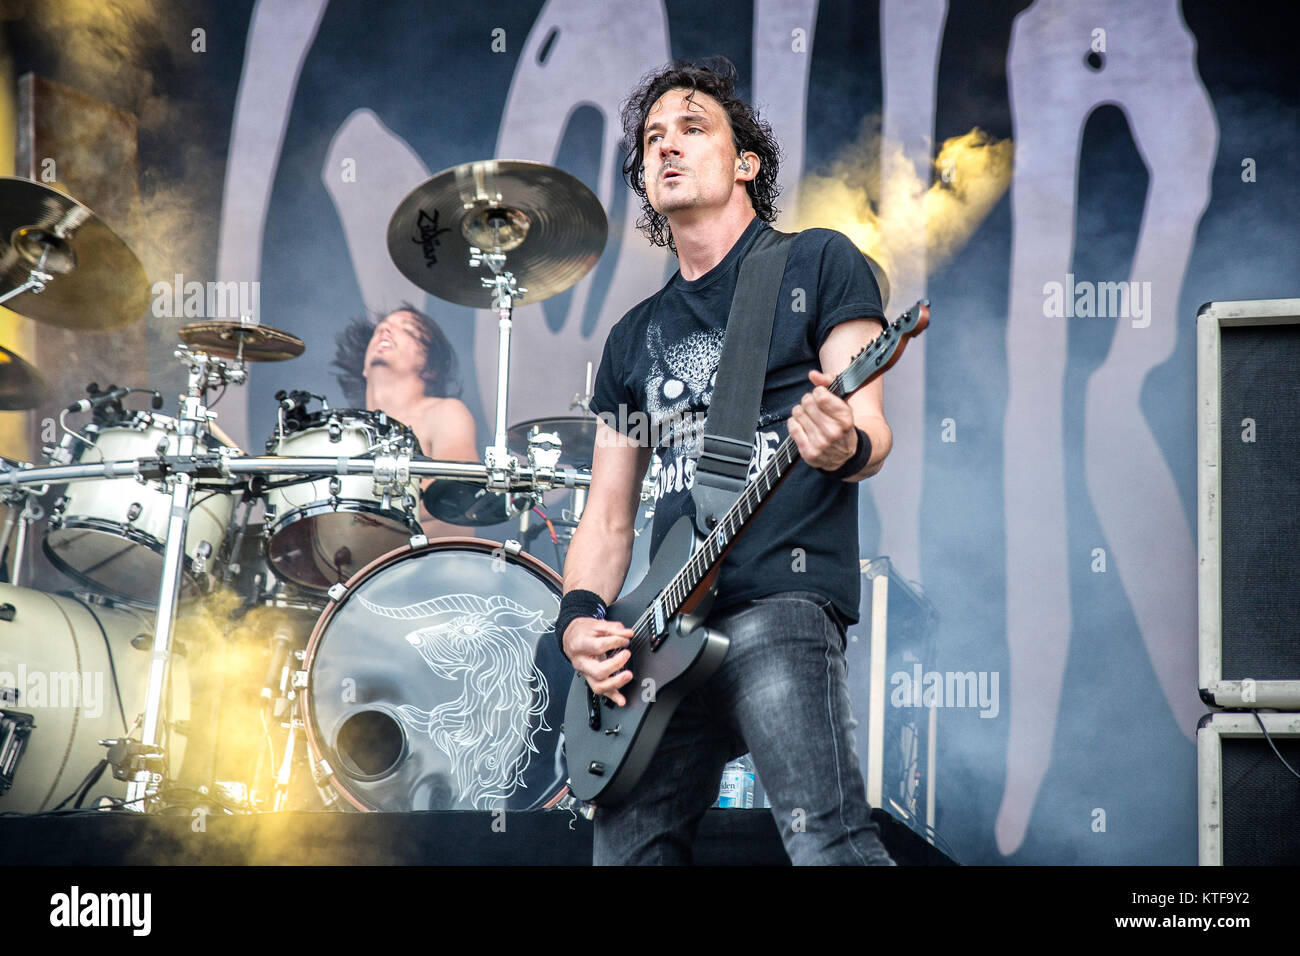 The French death metal band Gojira performs a live concert at the Norwegian music festival Tons of Rock 2015. Here guitarist and vocalist Joe Duplantier is seen live on stage. Norway, 19/06 2015. Stock Photo